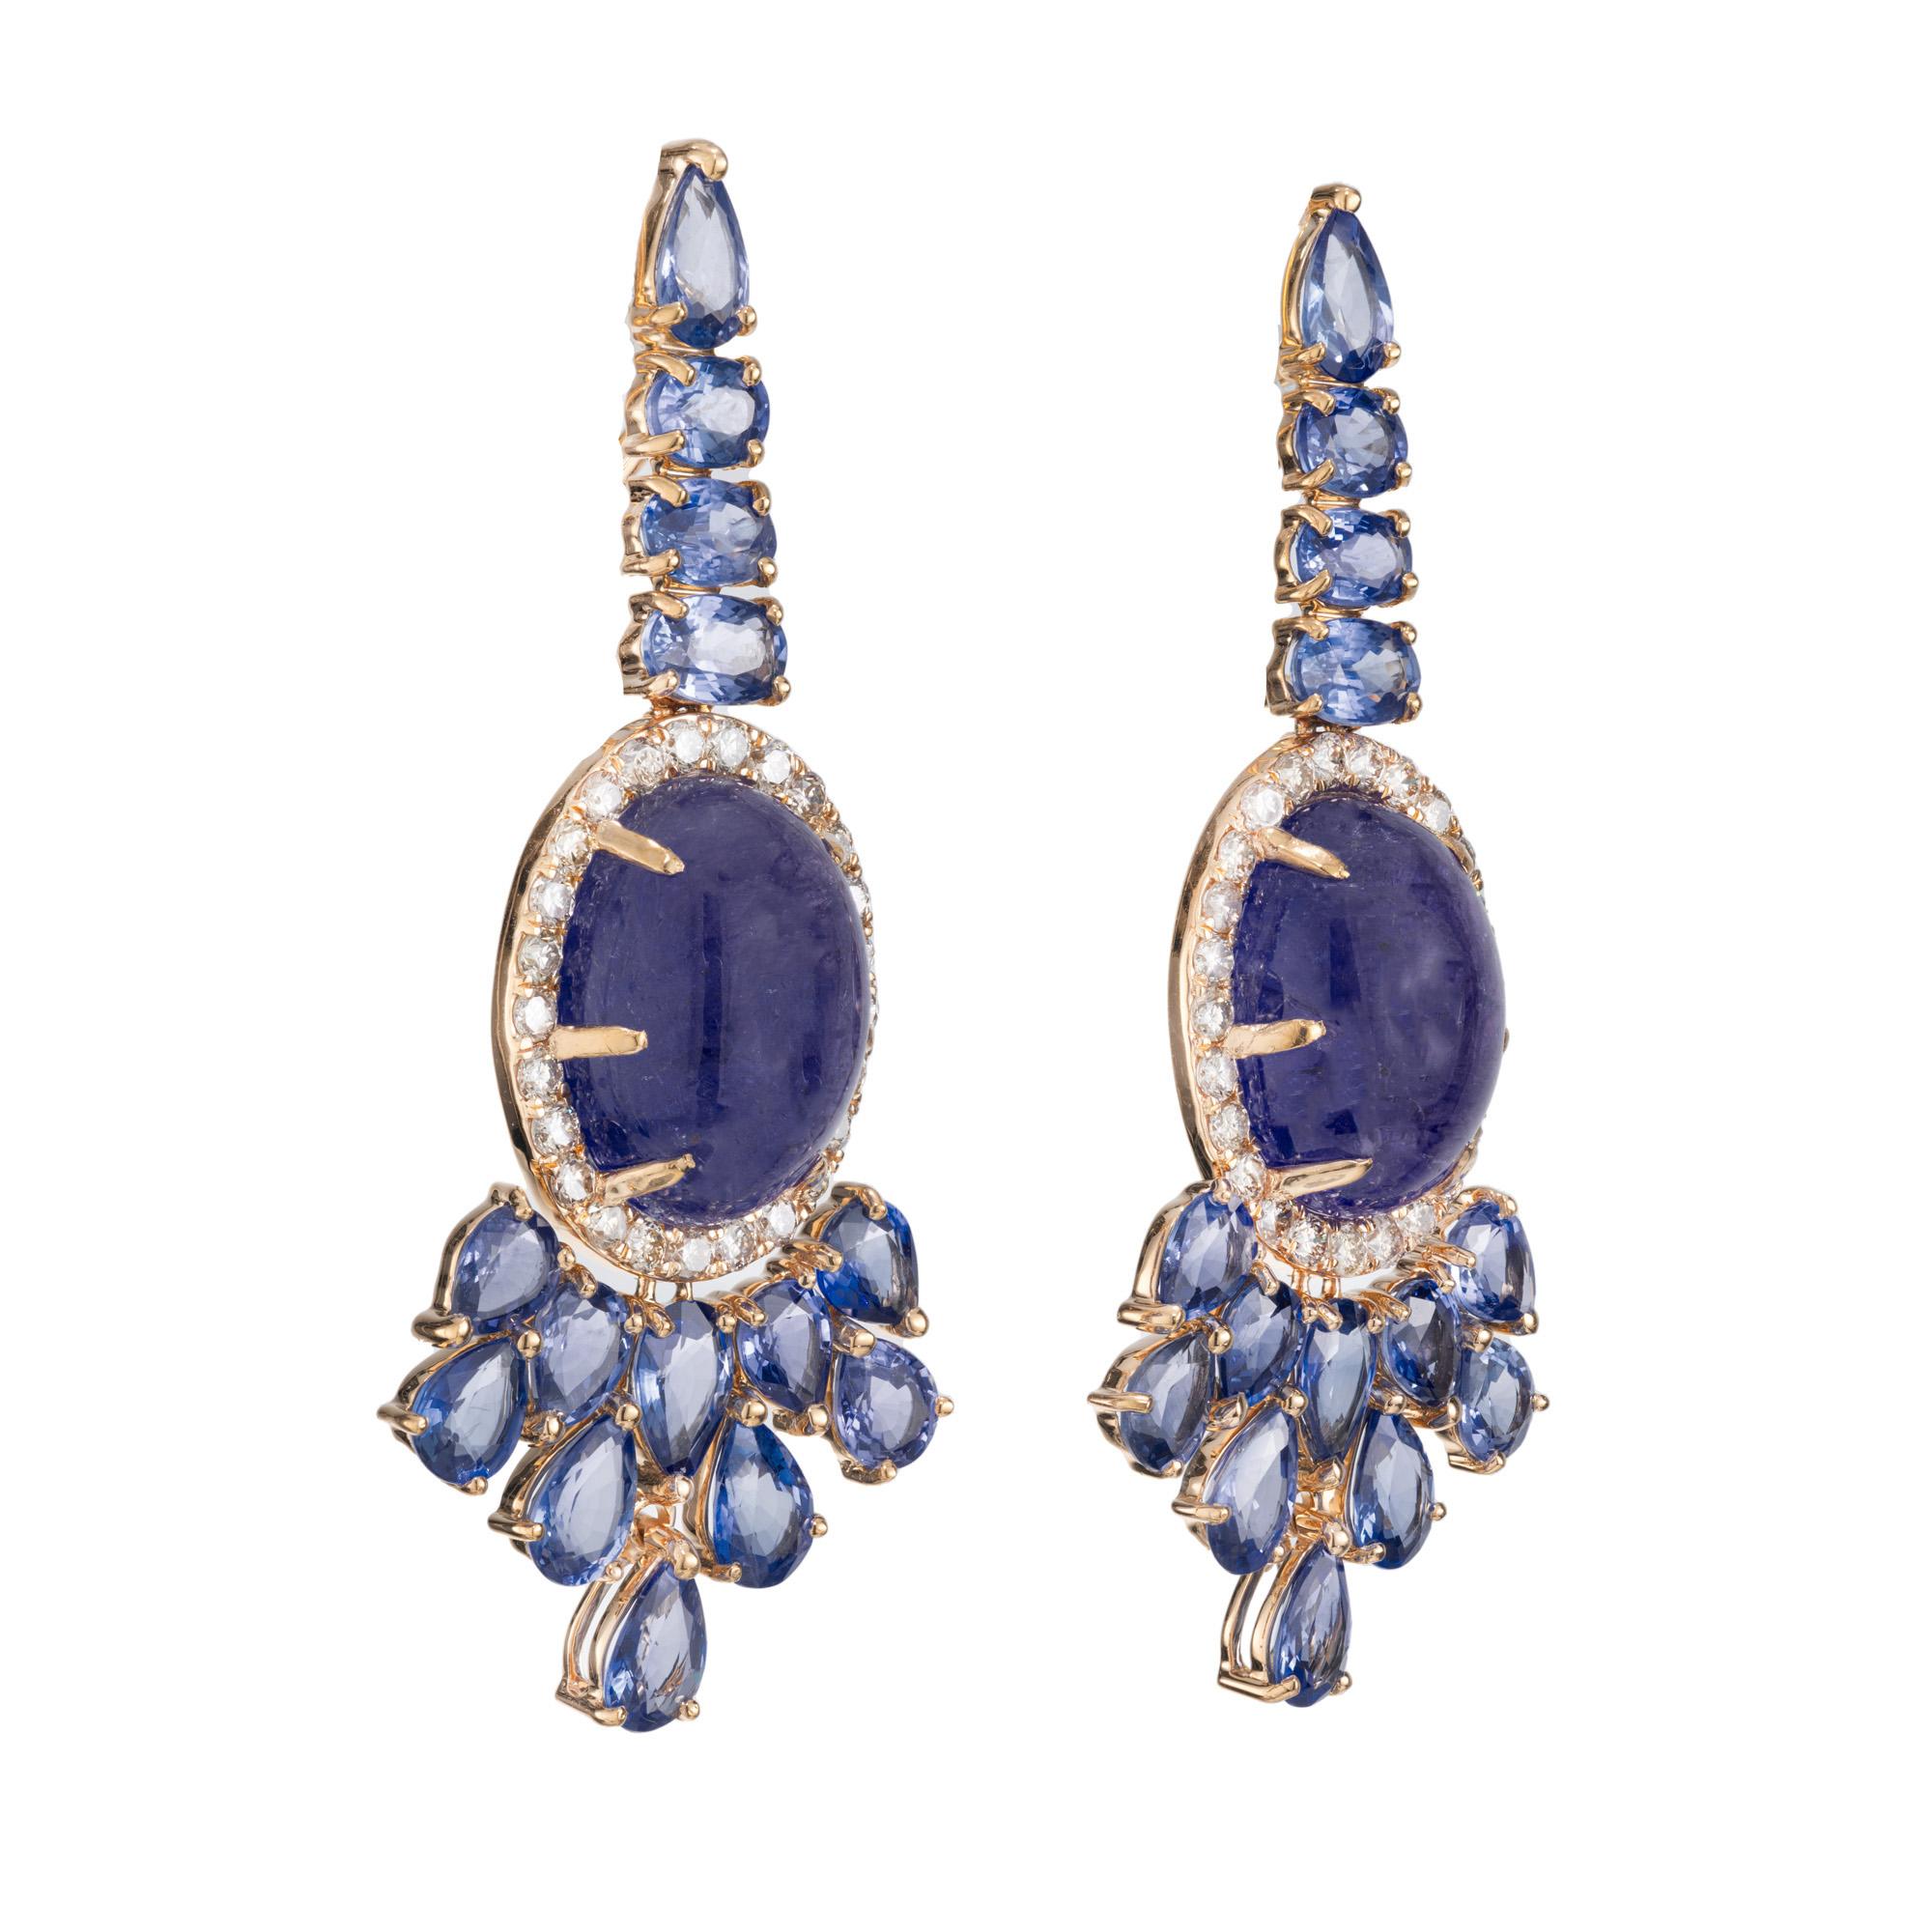 Spectacular Tanzanite, Sapphire and diamond dangle earrings. 2 vibrant oval cabochon tanzanite gemstones totaling 12.00cts are known for their exquisite blue-violet hue, are the centerpiece of these earrings. They are mounted in 18k yellow gold clip